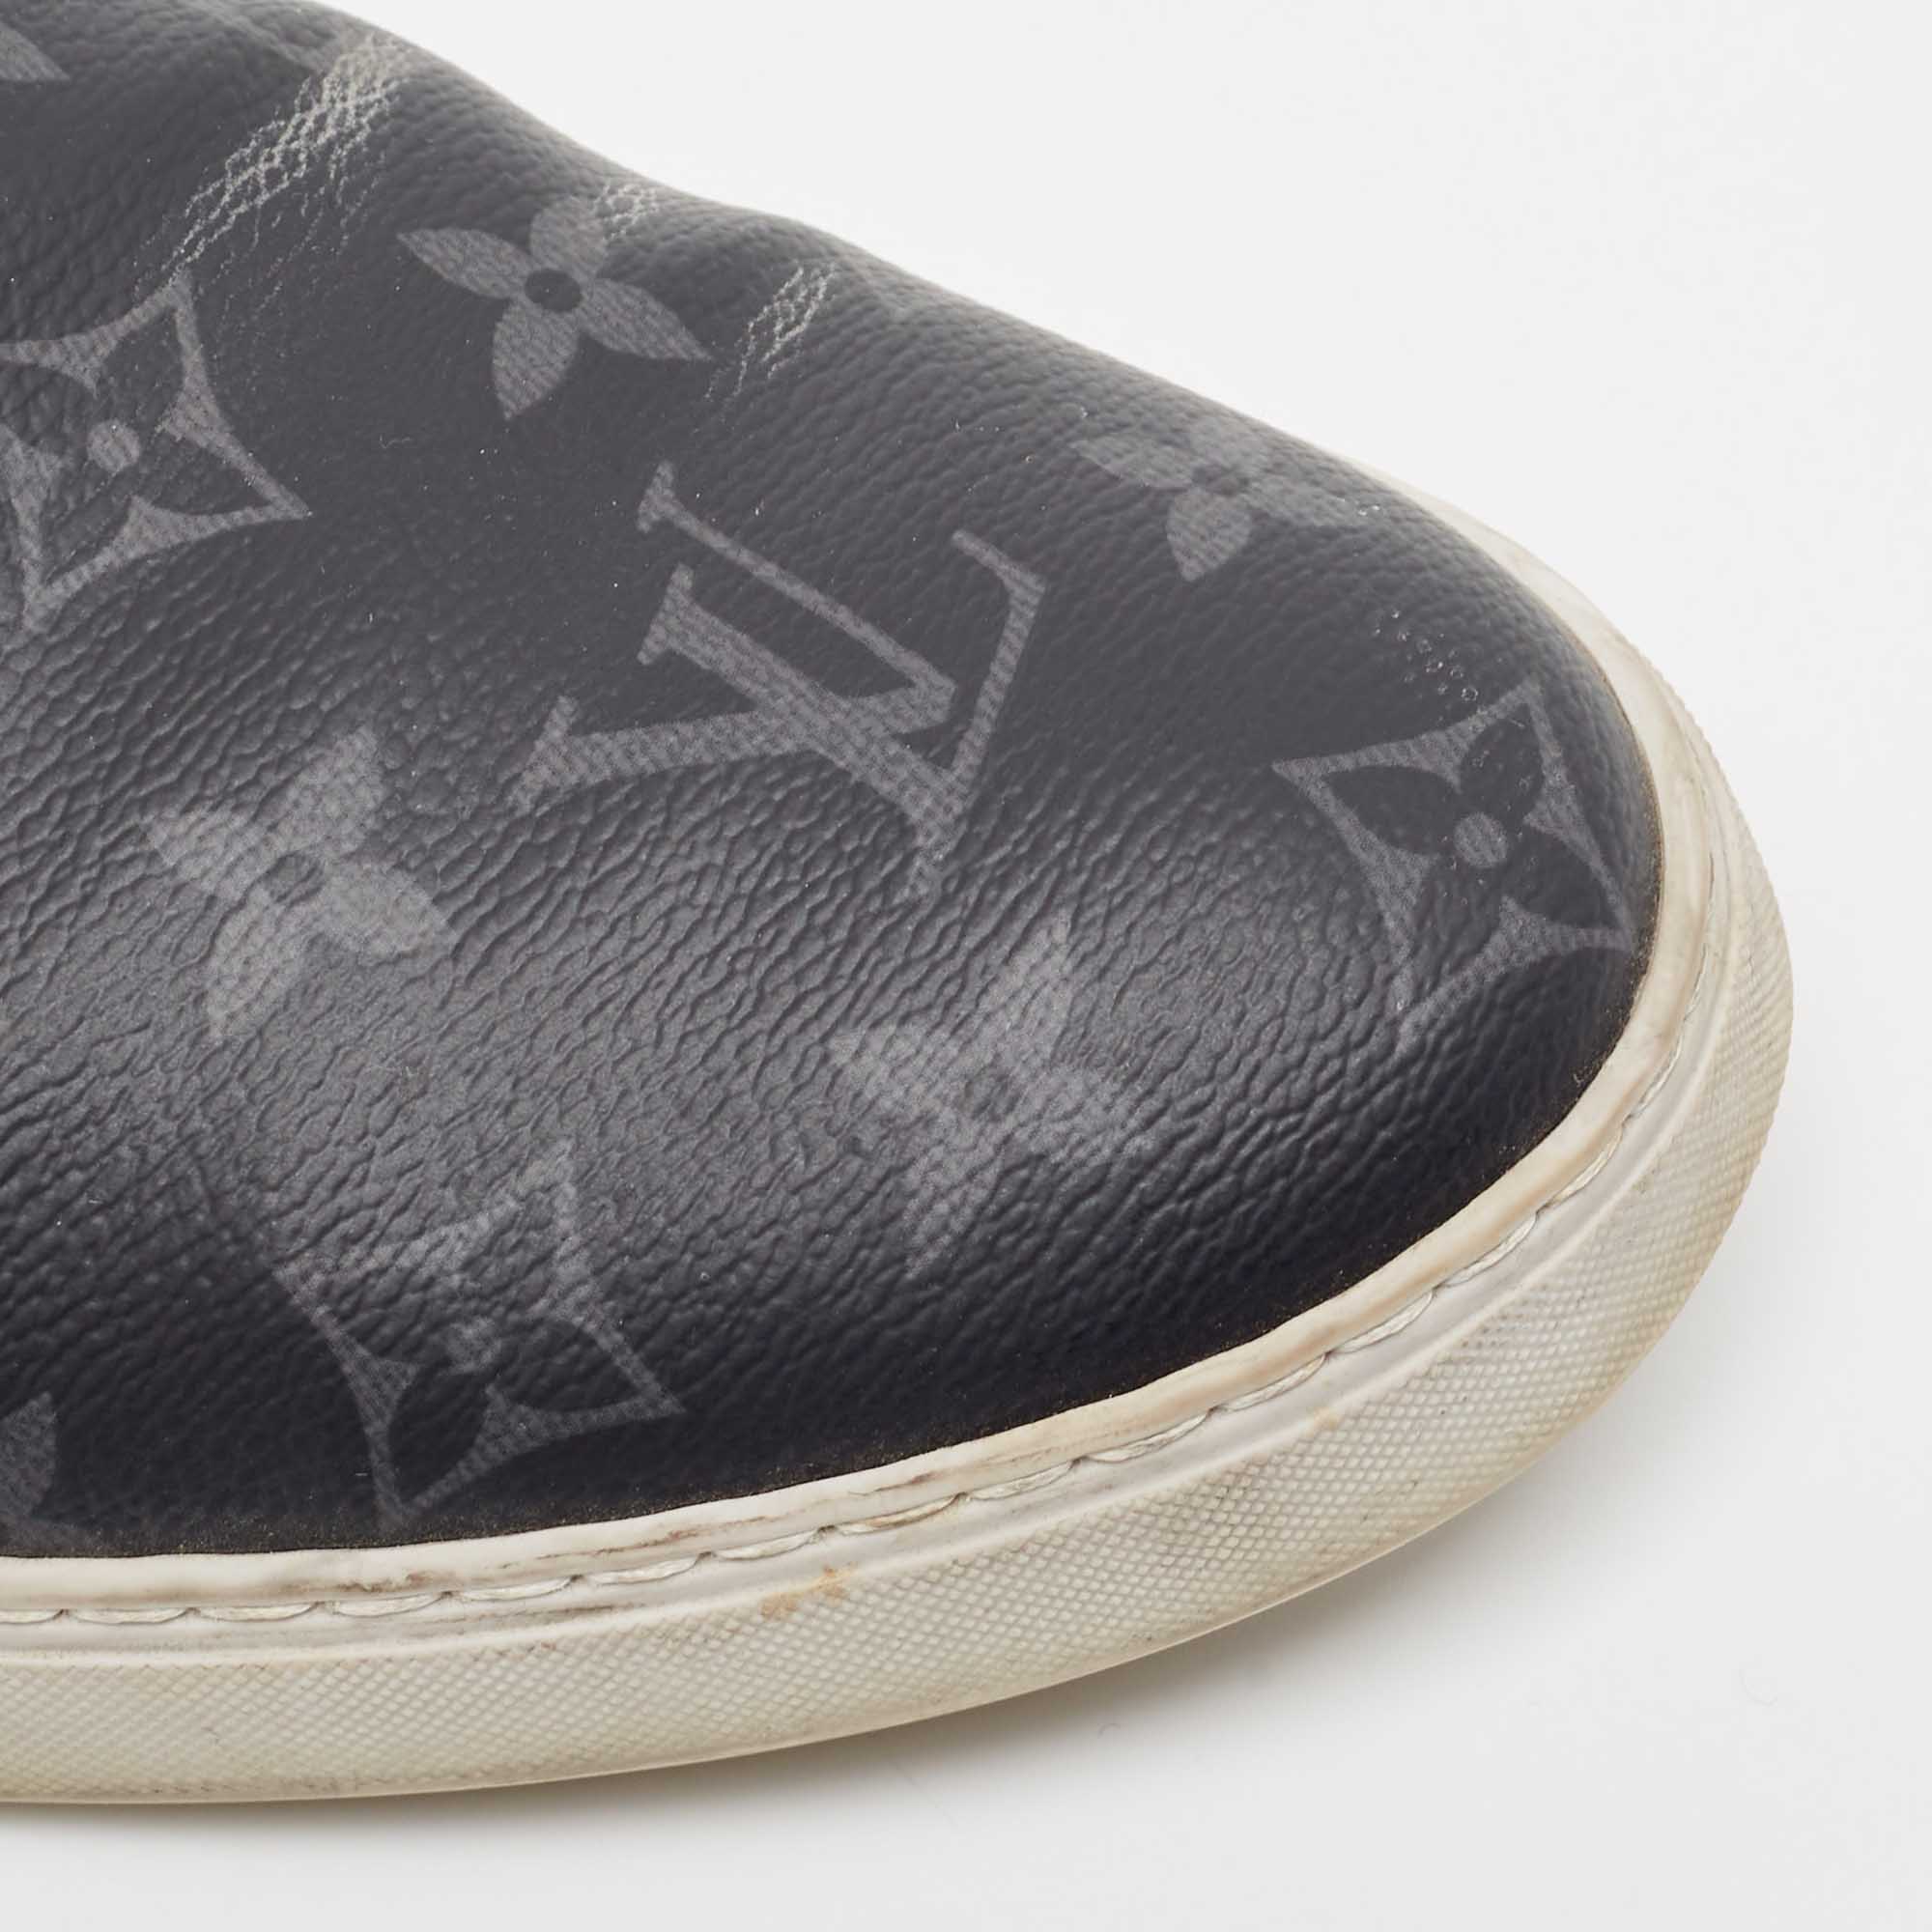 Louis Vuitton Black/Grey Monogram Canvas And Leather Slip On Sneakers Size 42.5